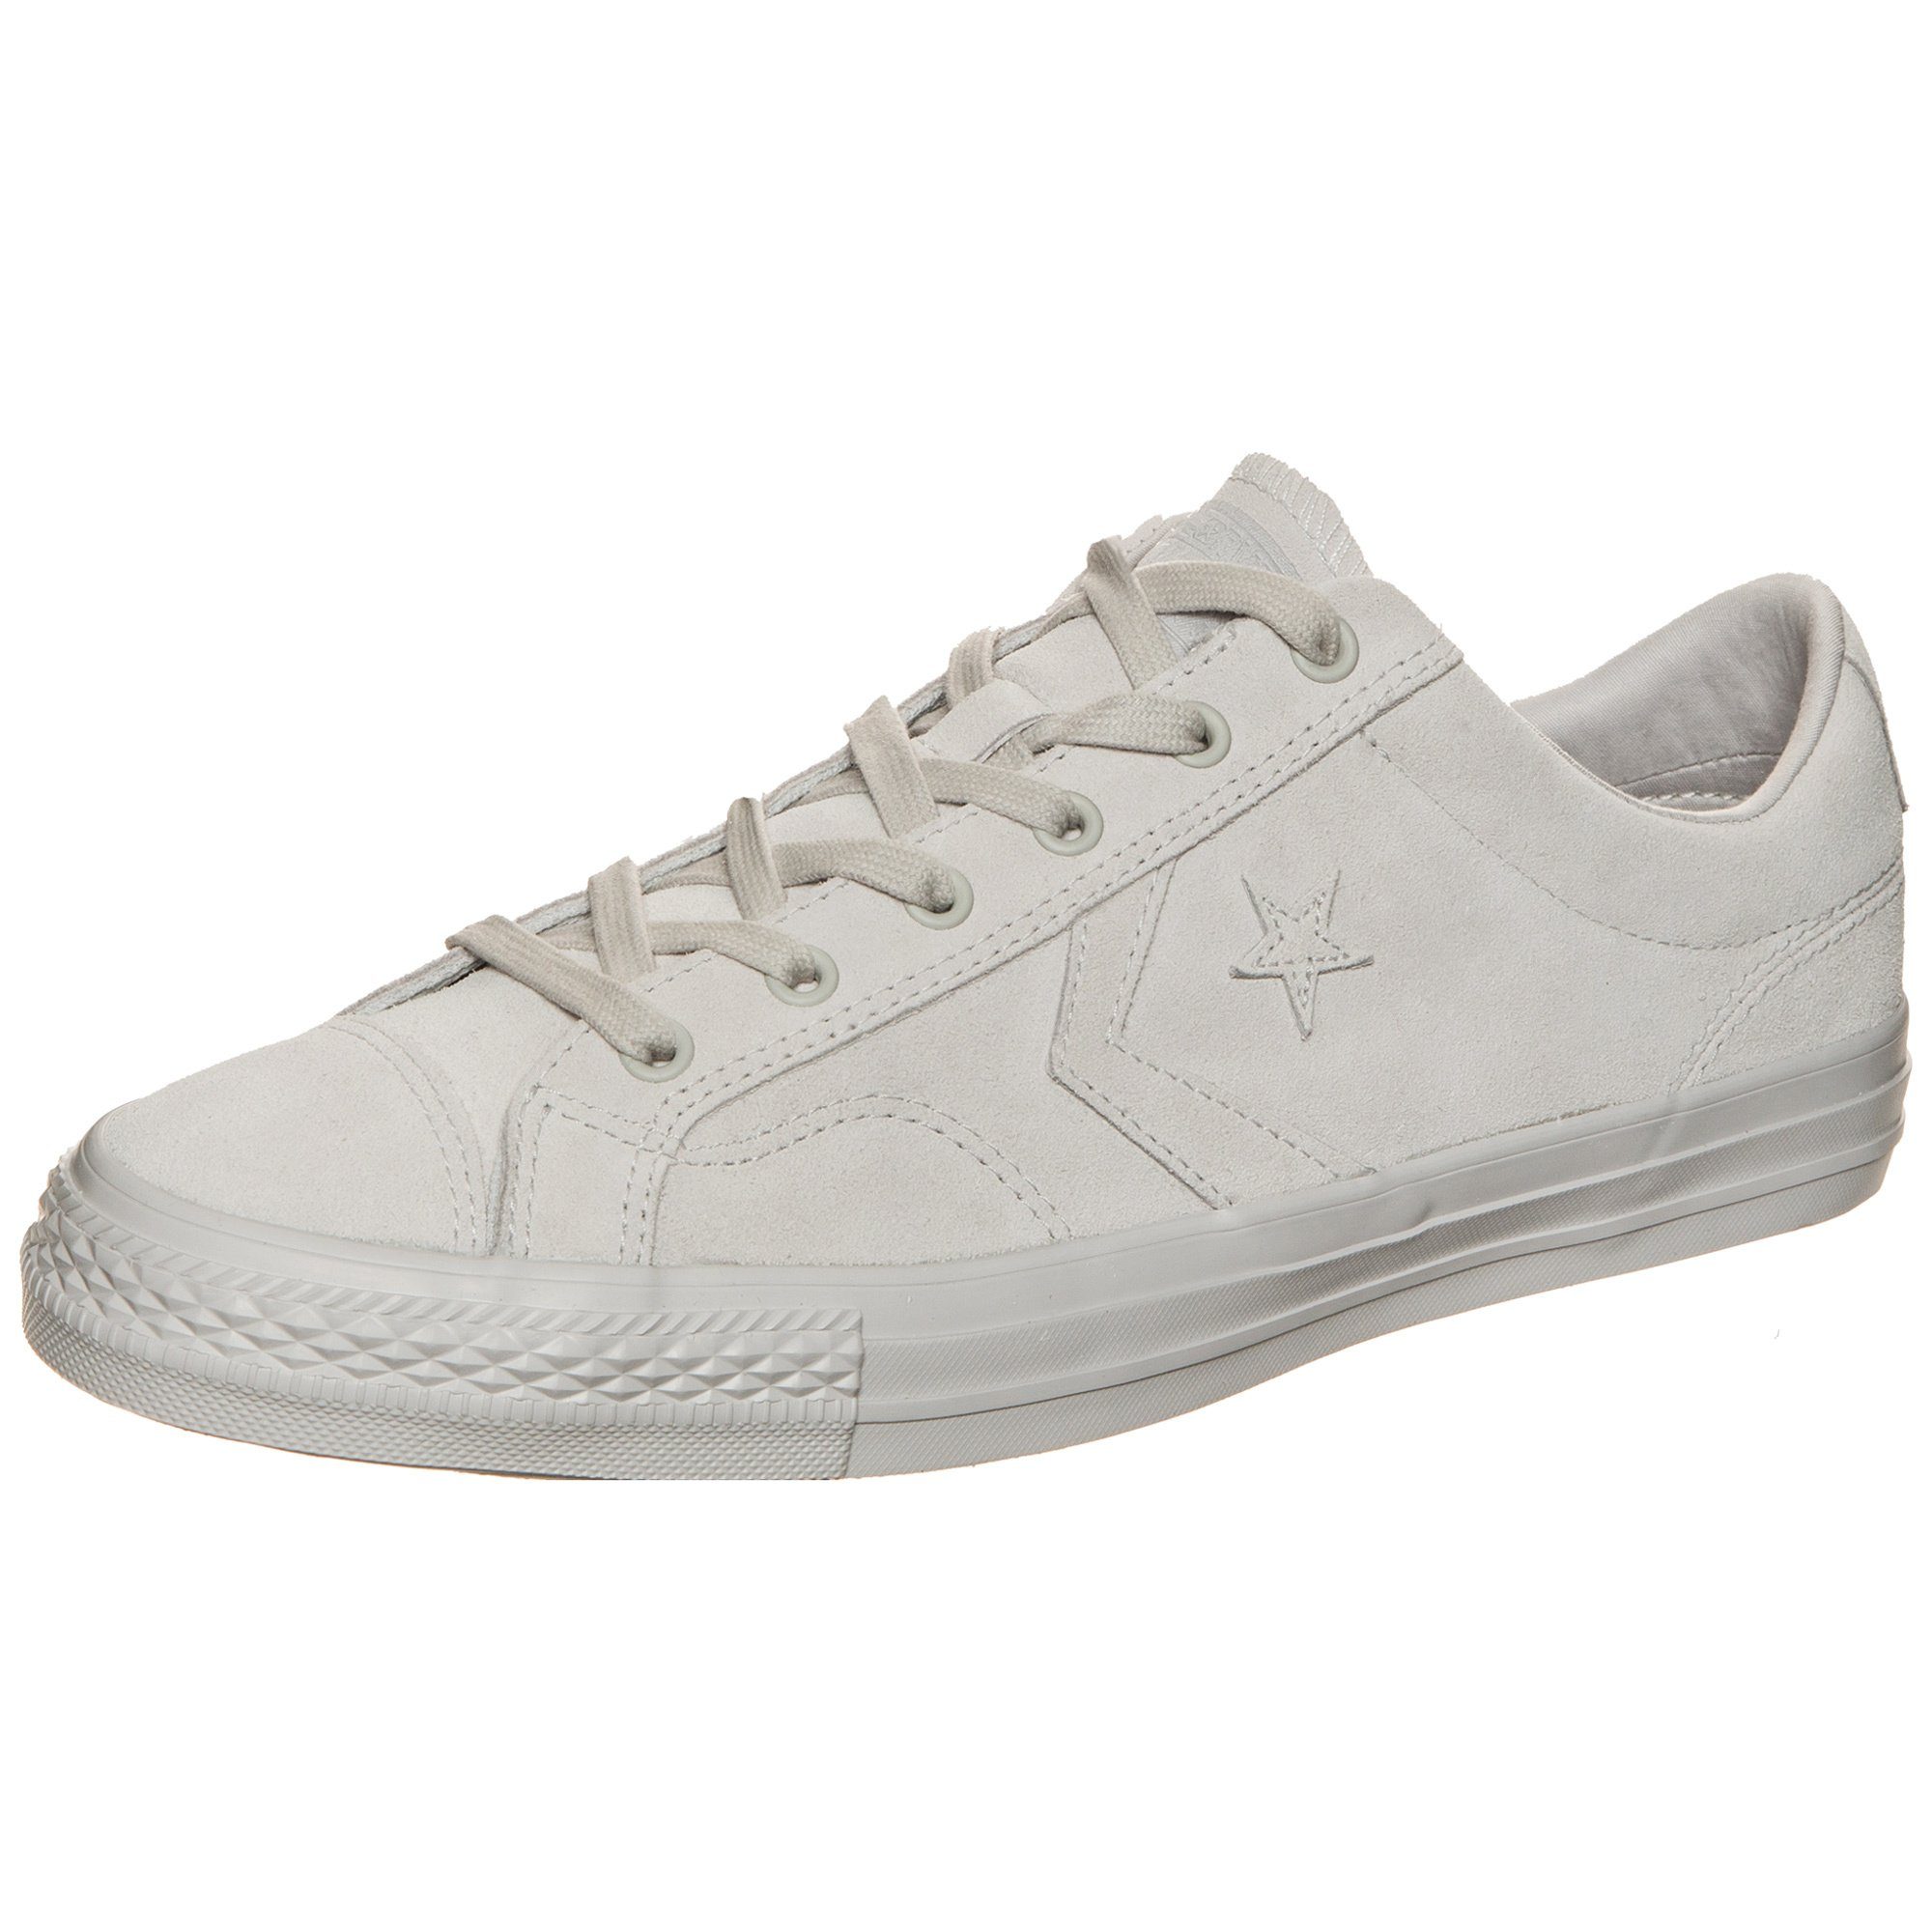 Otto - Converse NU 15% KORTING: Converse Star Player OX sneakers